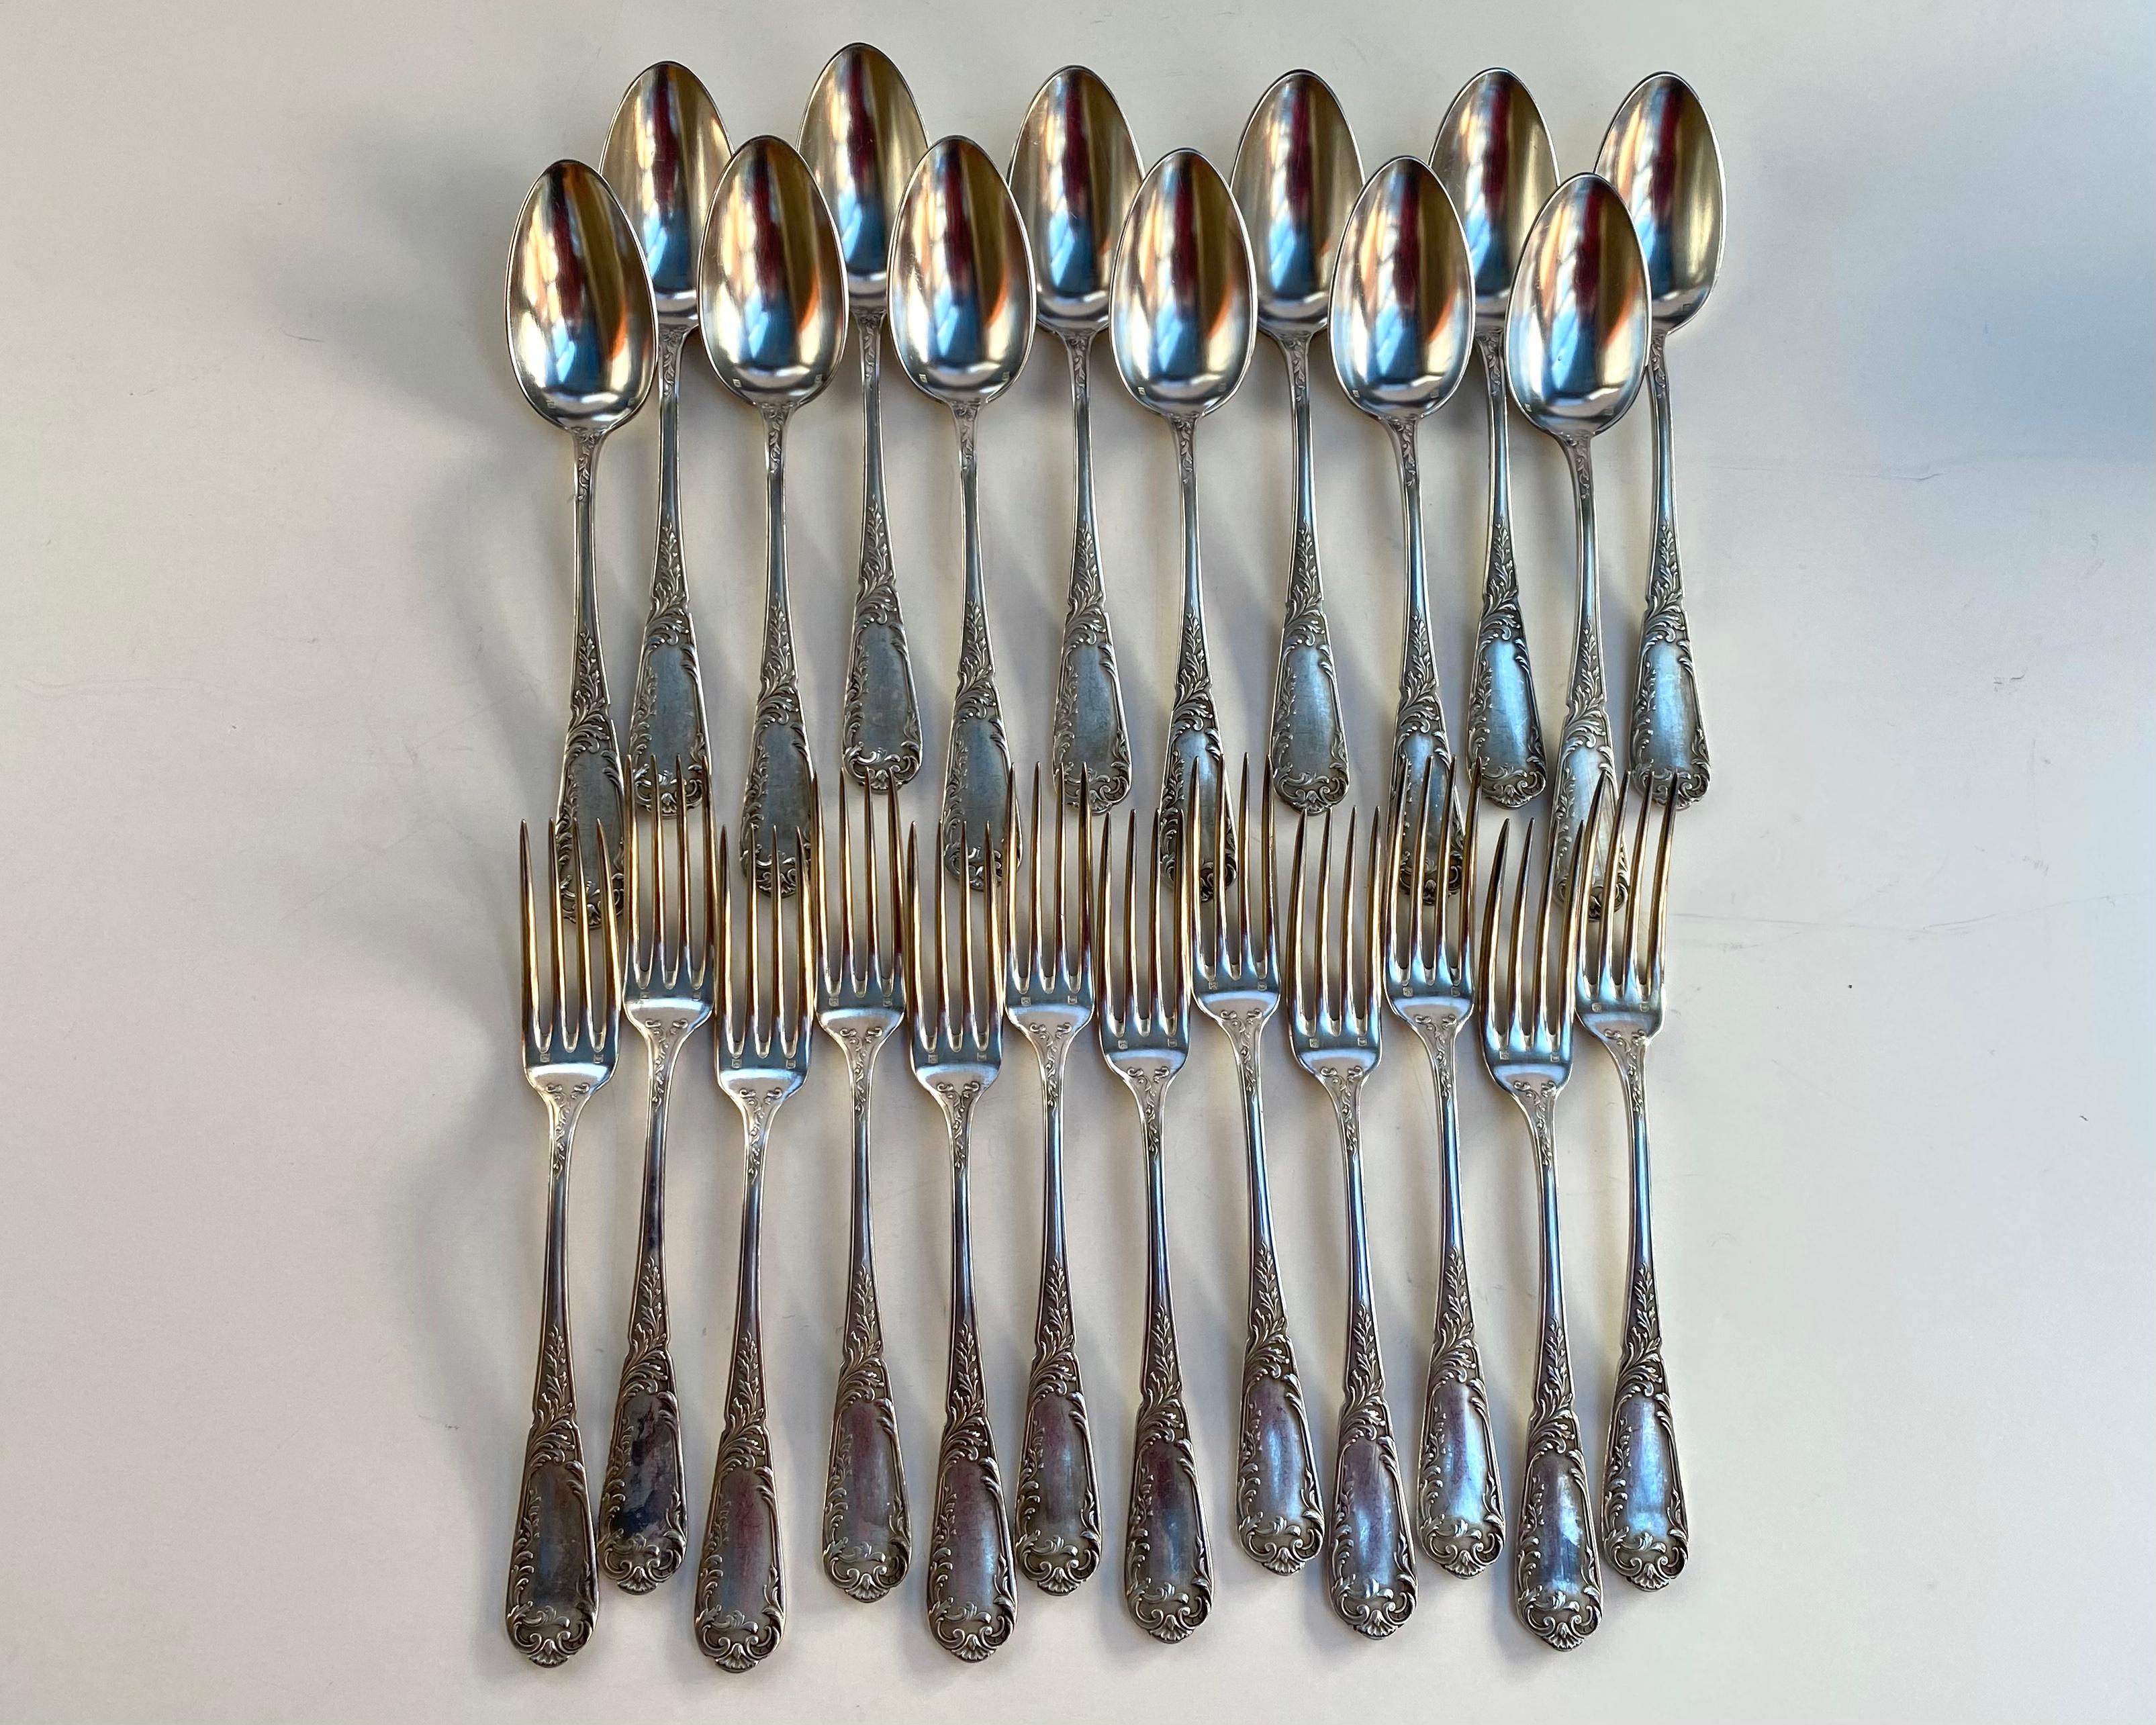 Vintage Silver Plate Utensils, 12 Spoons 12 Forks, Cutlery, Farmhouse Kitchen Silverplate, Dinner Forks.

Set of silver plated cutlery in the amount of 24 pieces in authentic case.

The set comprises of 12 forks and 12 table spoons.

France,